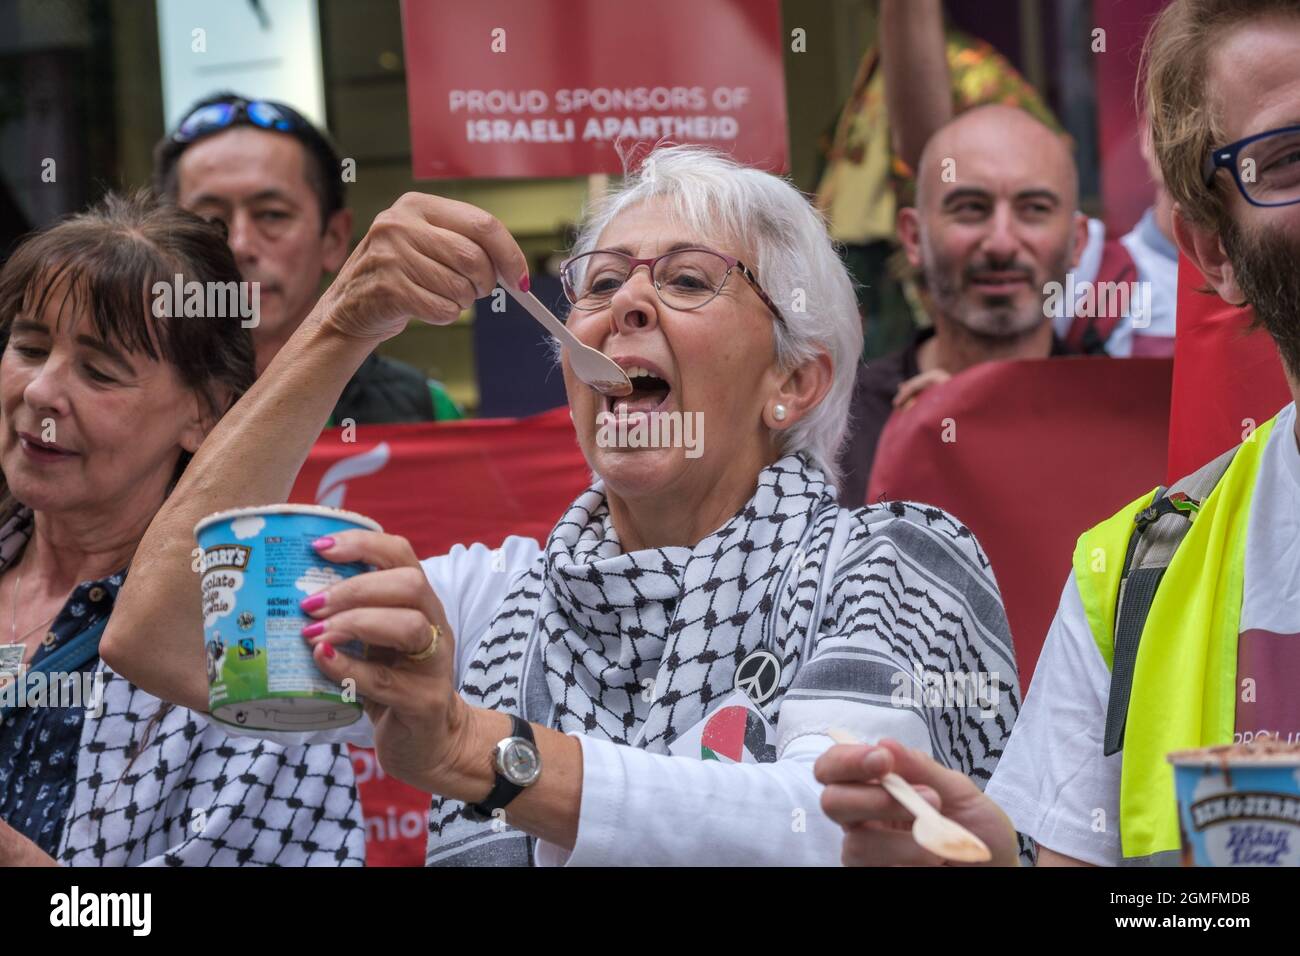 London, UK. 18 Sept 2021. A woman outside the London Puma store in Carnaby Street celebrates the decision by Ben & Jerry to boycott Israel by eating their ice cream in the protest on the #BoycottPUMA Global Day of Action. They call on Puma to end its sponsorship of the Israel Football Association, which governs teams in illegal Israeli settlements in the occupied Palestinian West Bank. A small group with Israeli flags came to support Puma. Peter Marshall/Alamy Live News Stock Photo